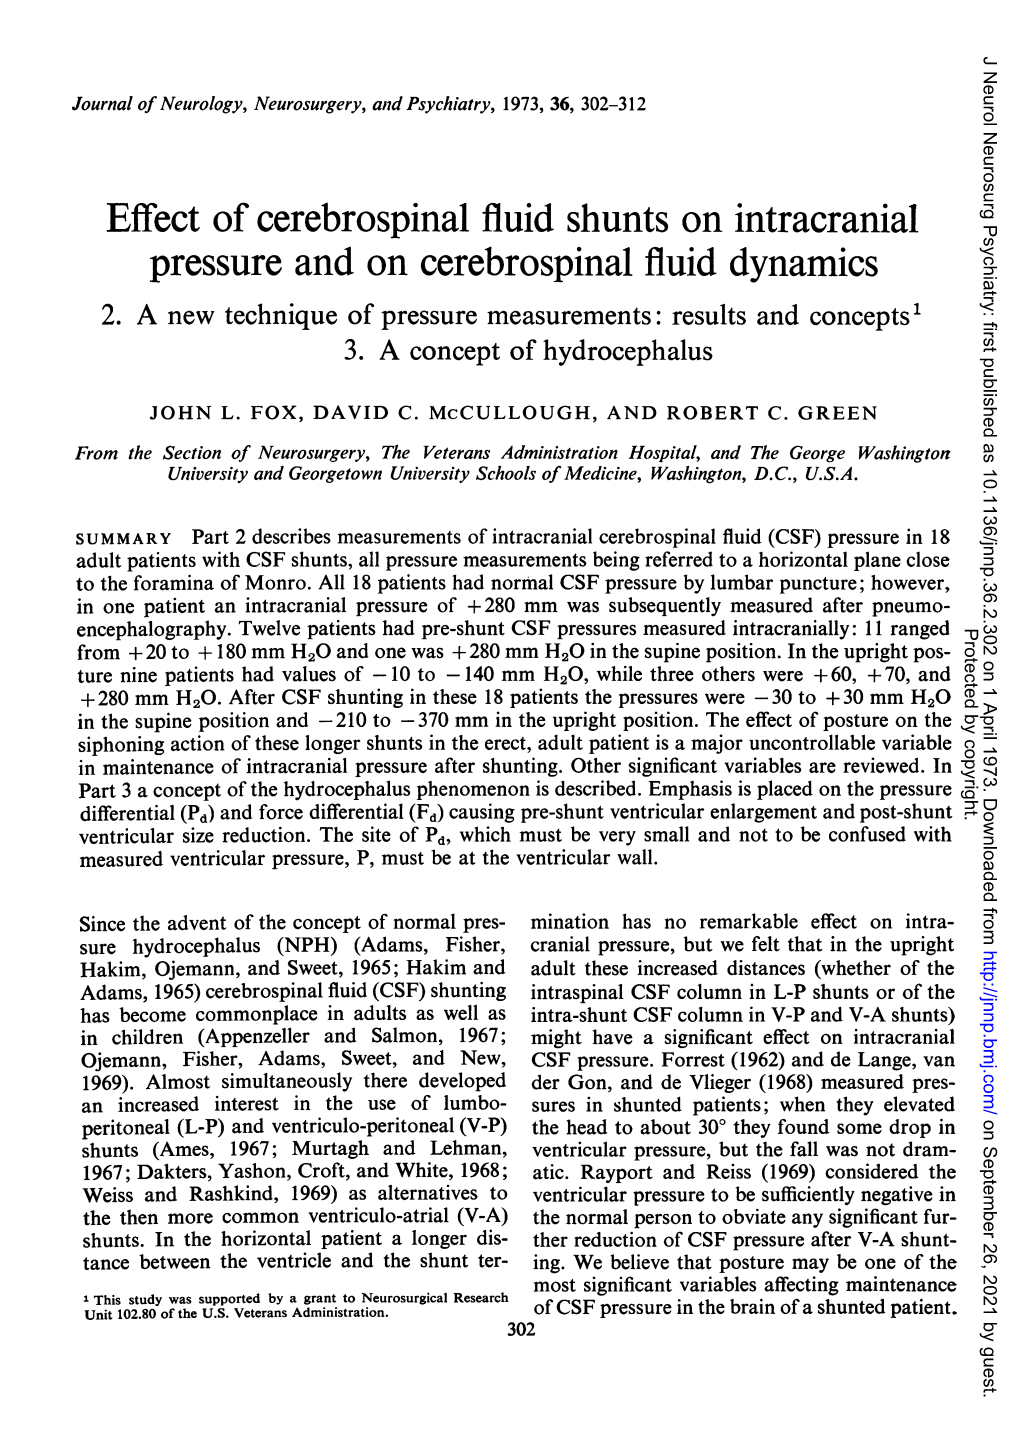 Effect of Cerebrospinal Fluid Shunts on Intracranial Pressure and on Cerebrospinal Fluid Dynamics 2